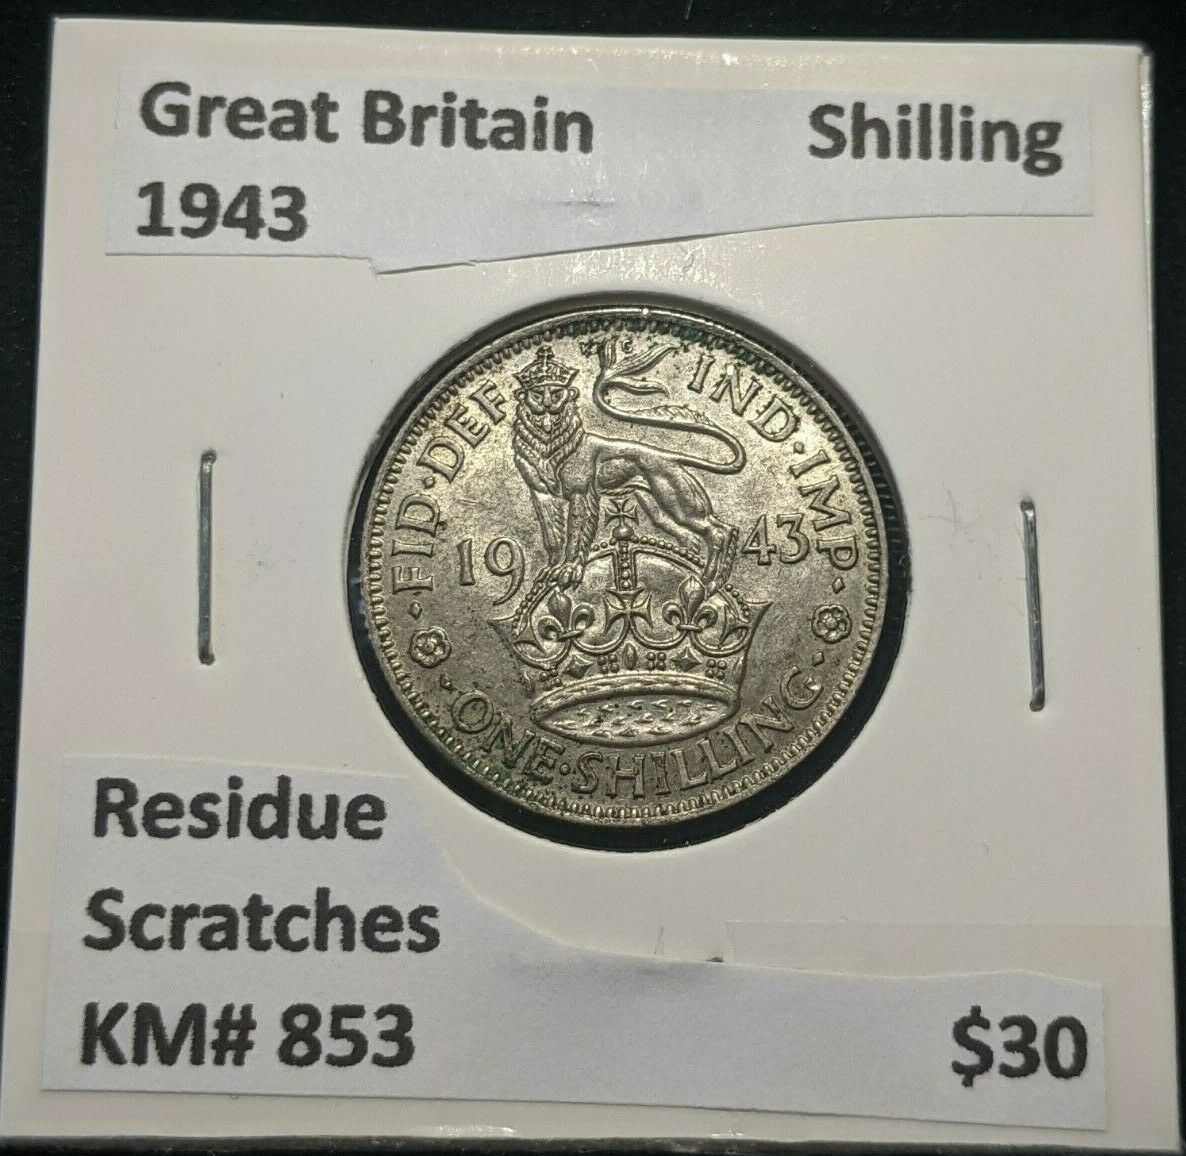 Great Britain 1943 Shilling 1/- KM# 853 Residue Scratches #963 4A